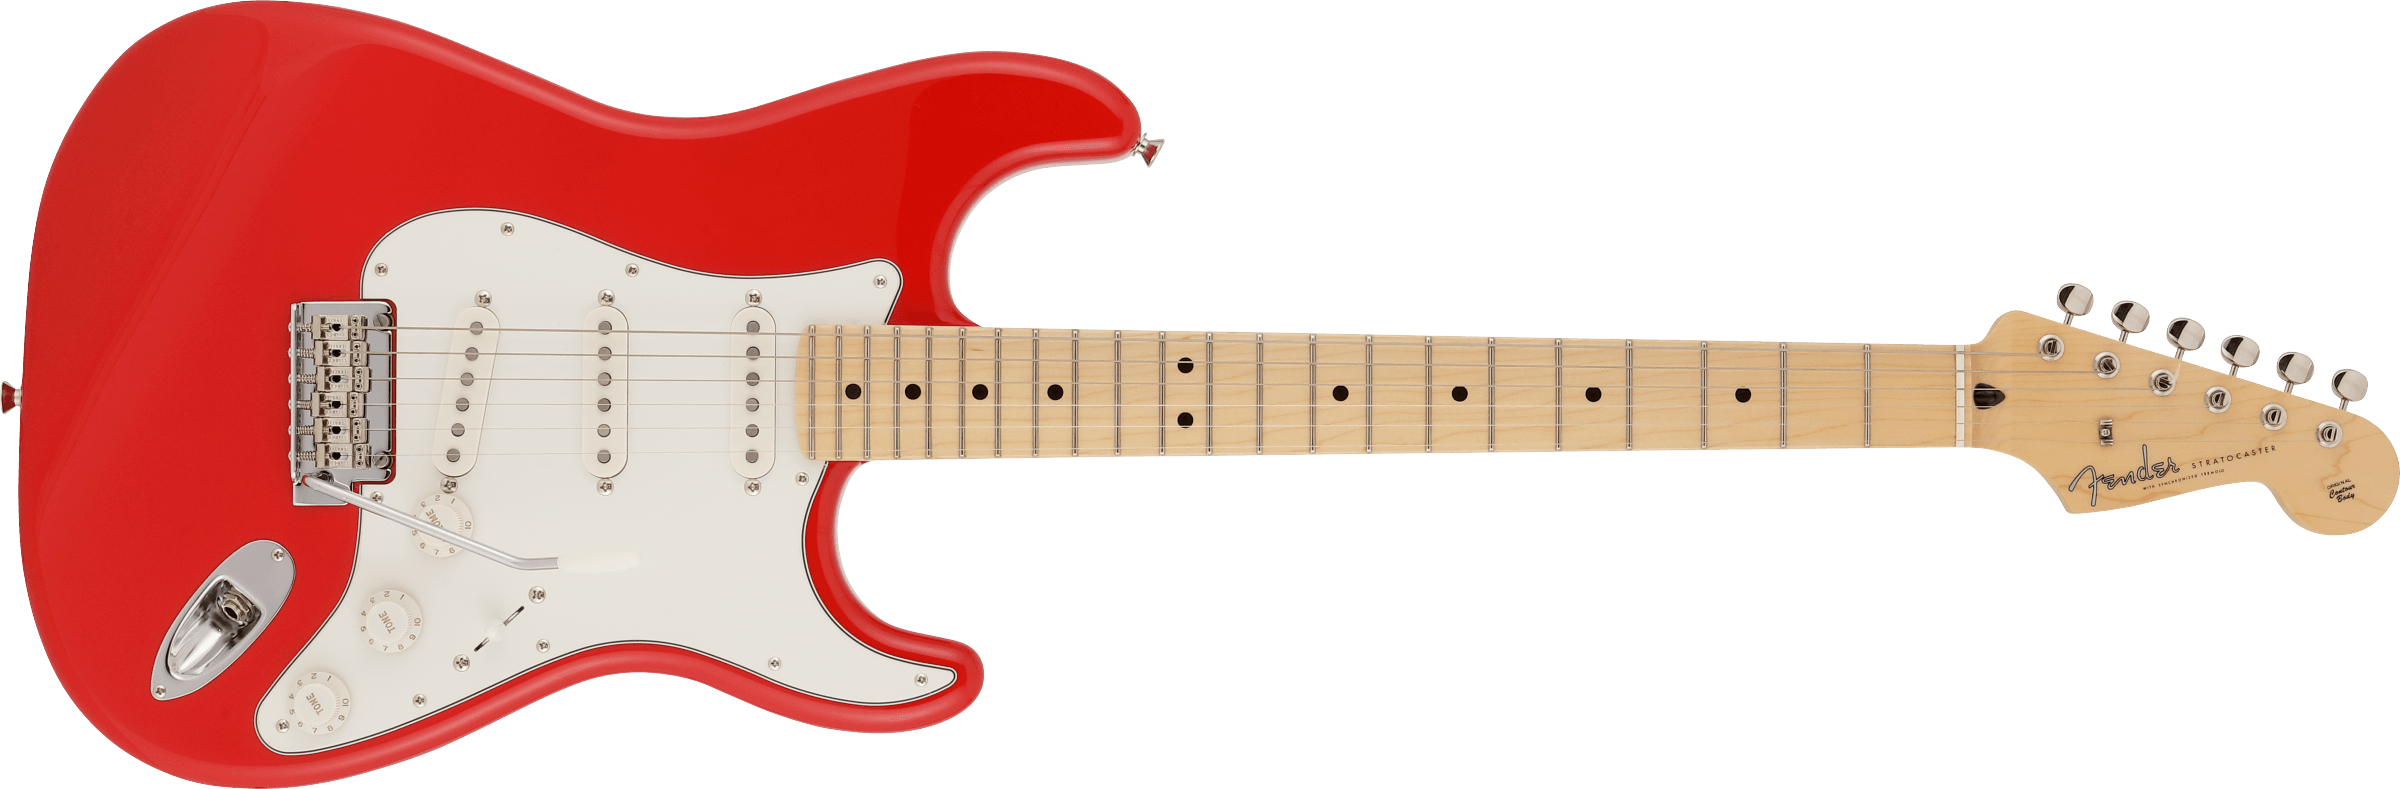 FENDER MADE IN JAPAN HYBRID II STRATOCASTER® MODENA RED – The